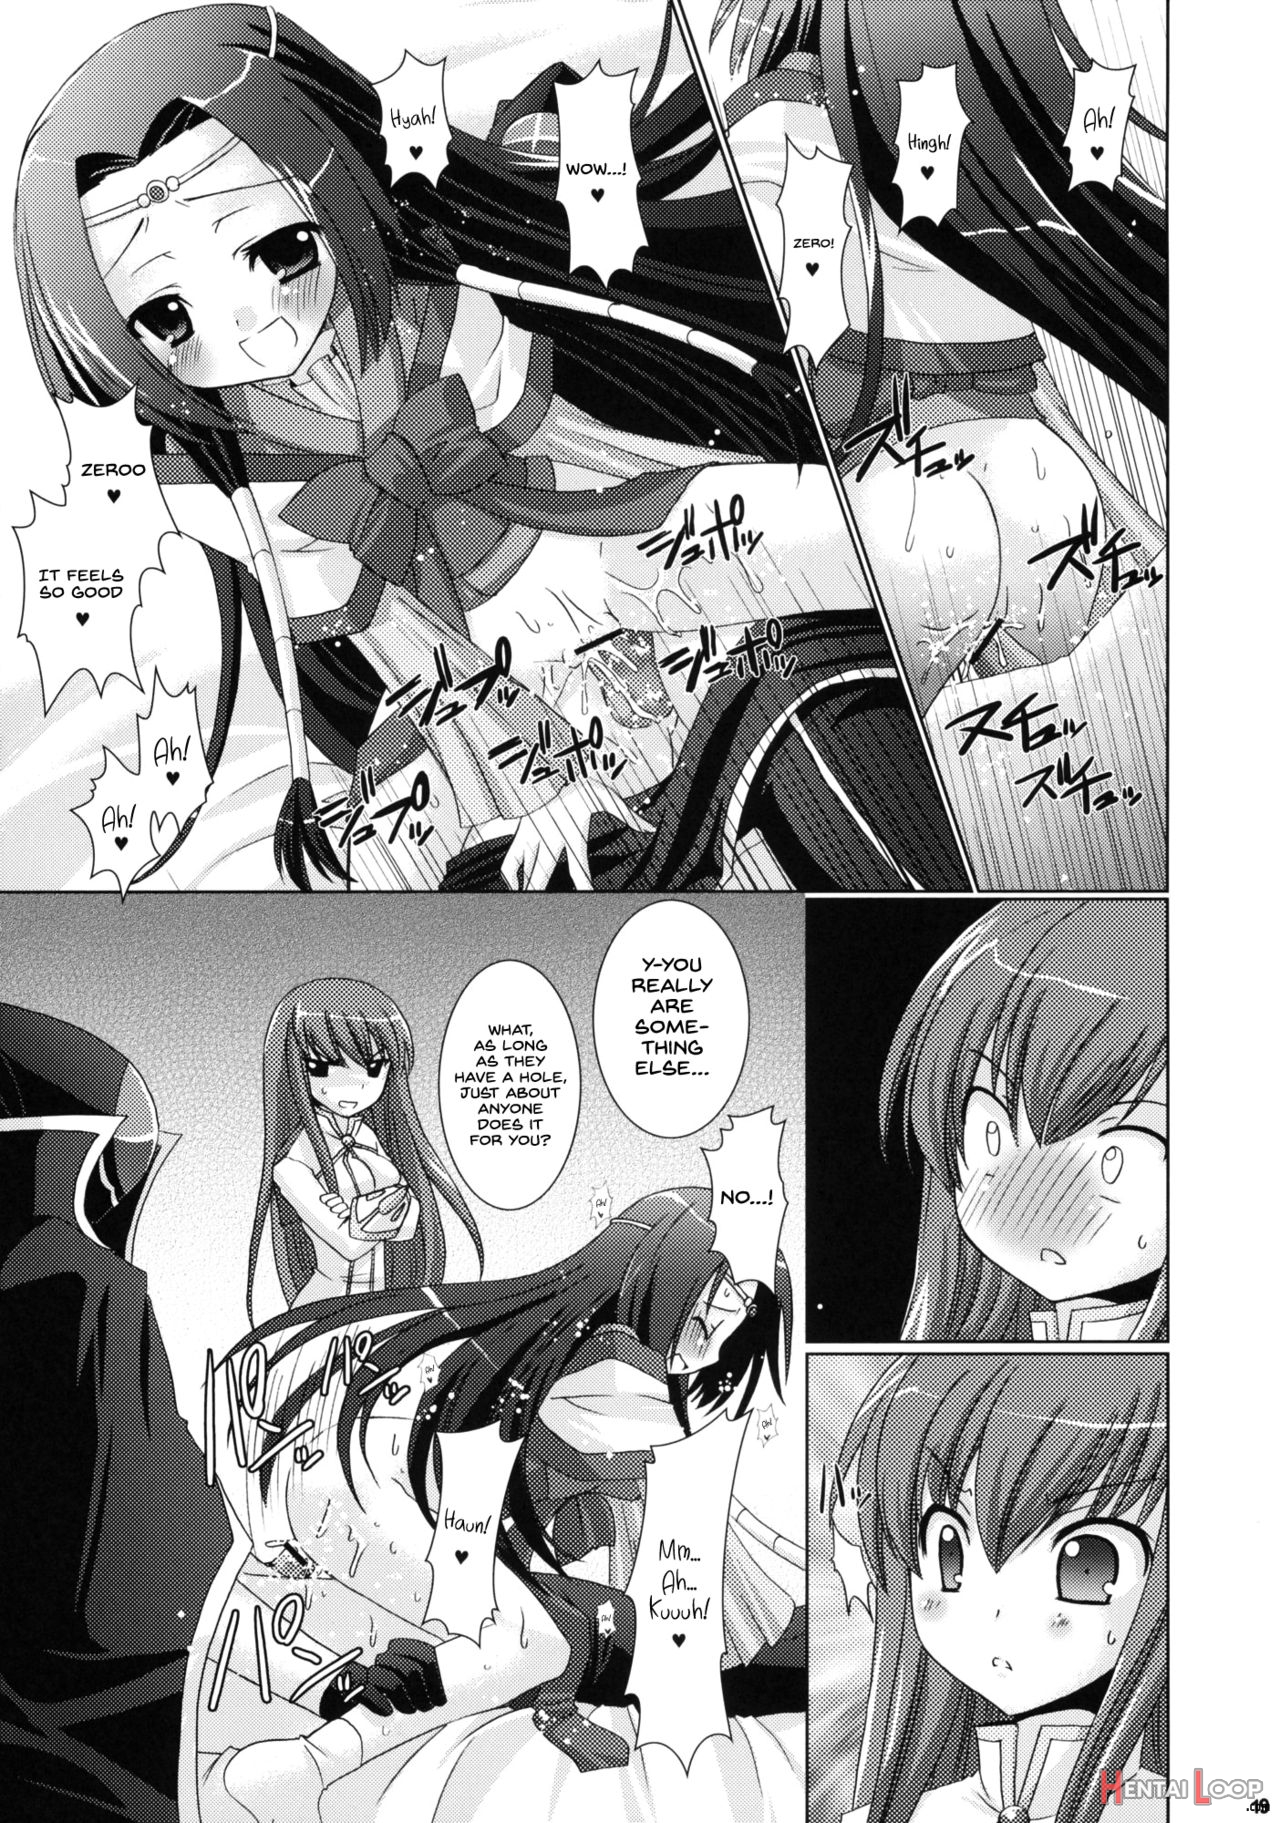 Kouhime Kyouhime page 19